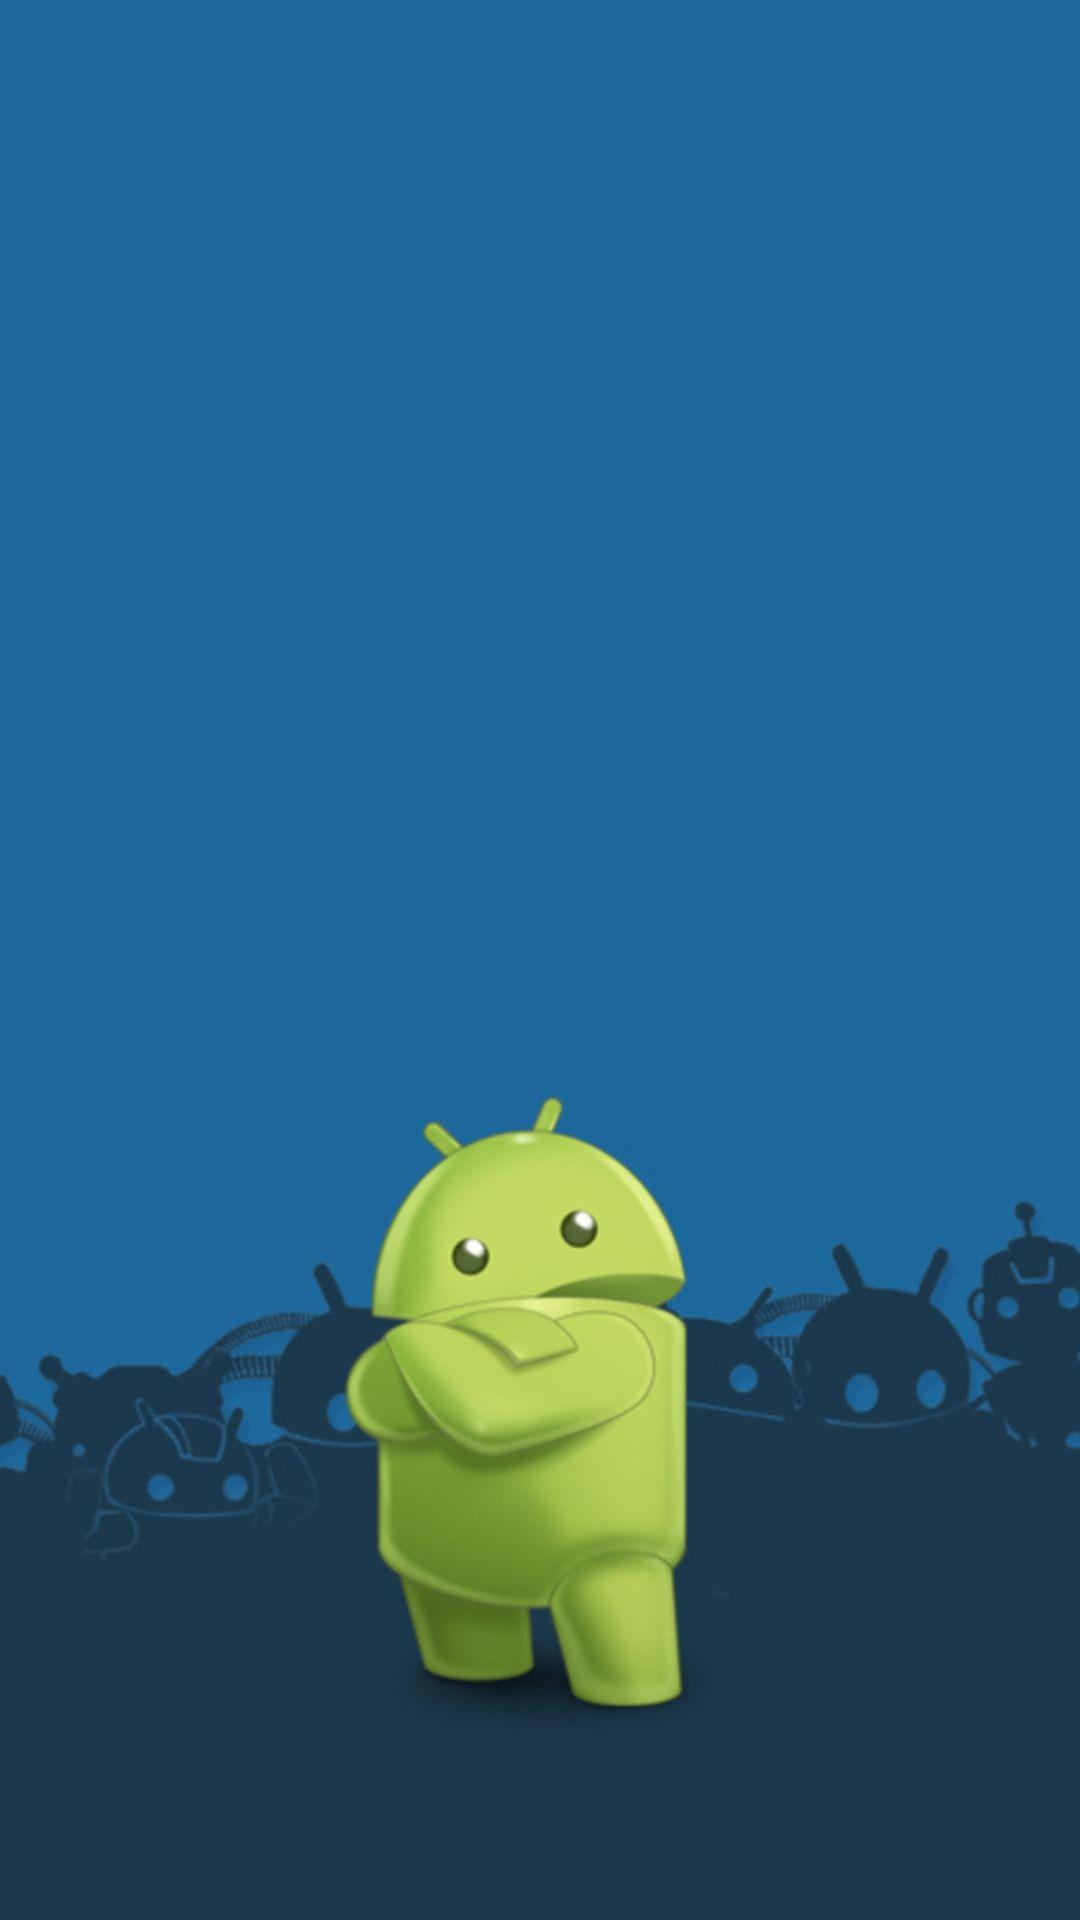 Cool Smartphone Logo - Cool Android Logo Android Smartphone Wallpaper ⋆ GetPhotos